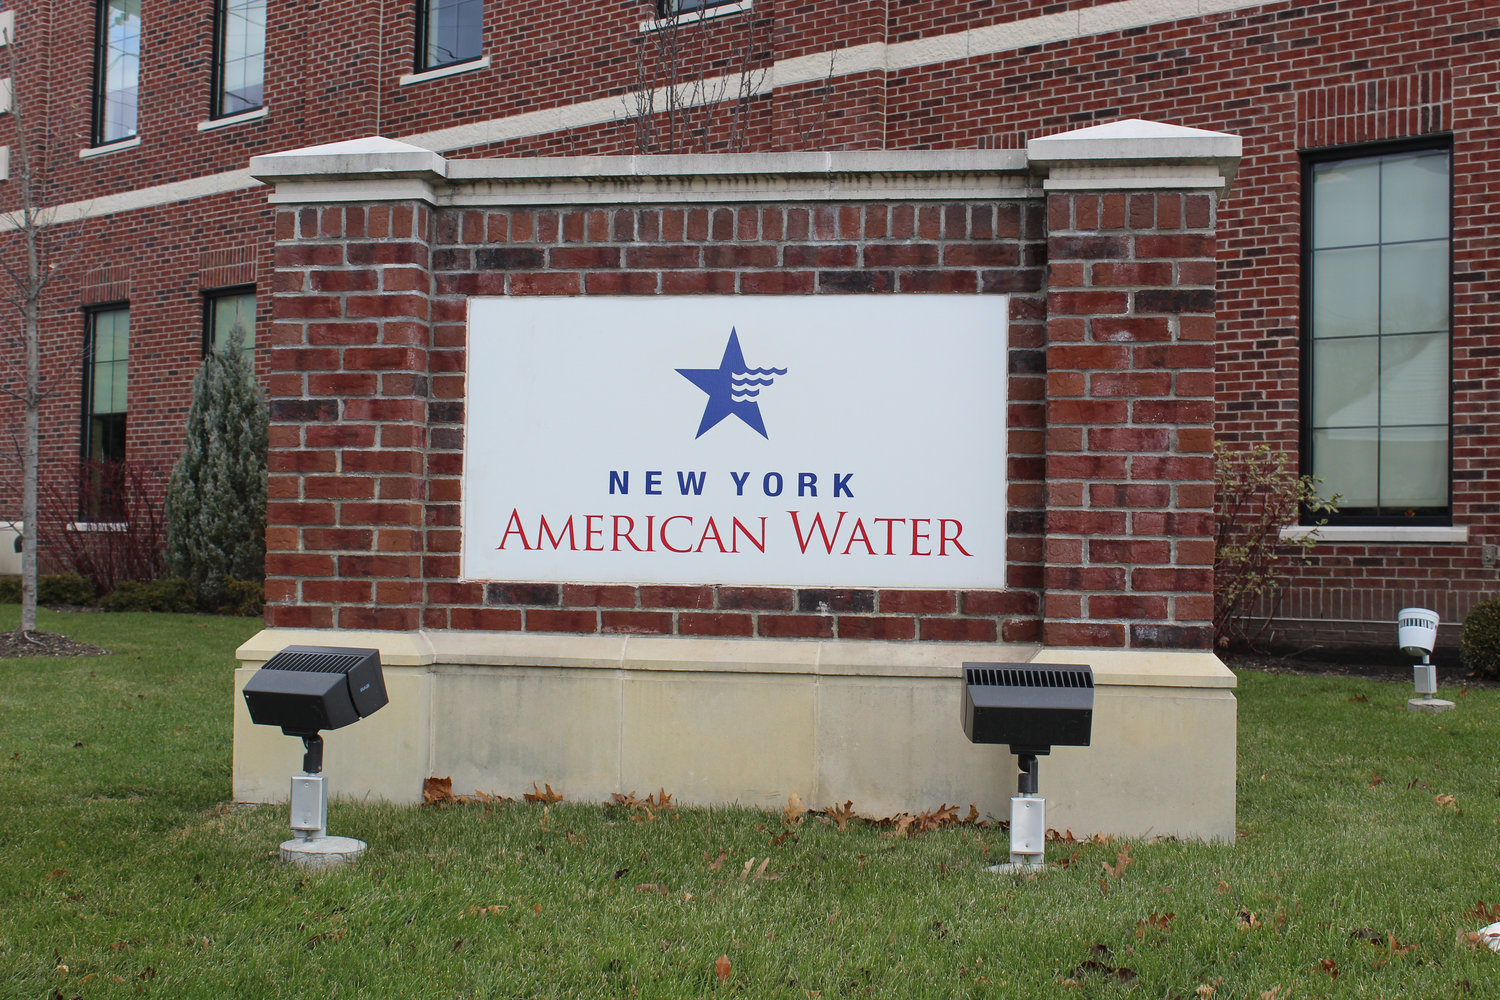 New York American Water's corporate offices in Merrick.